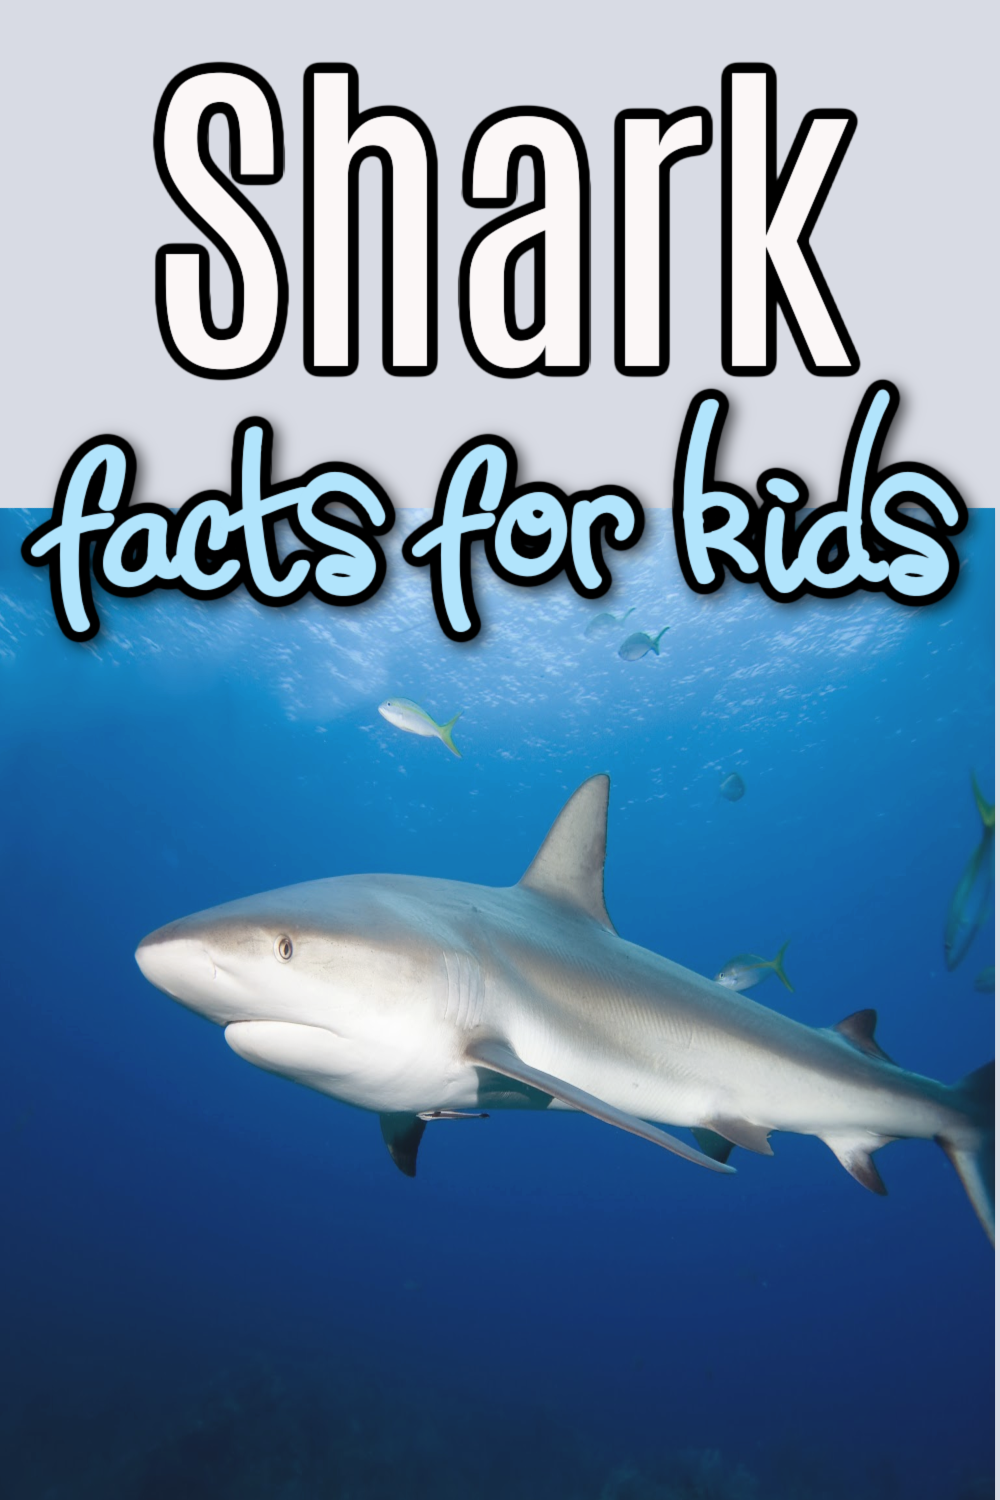 Fun Facts About Sharks For Kids